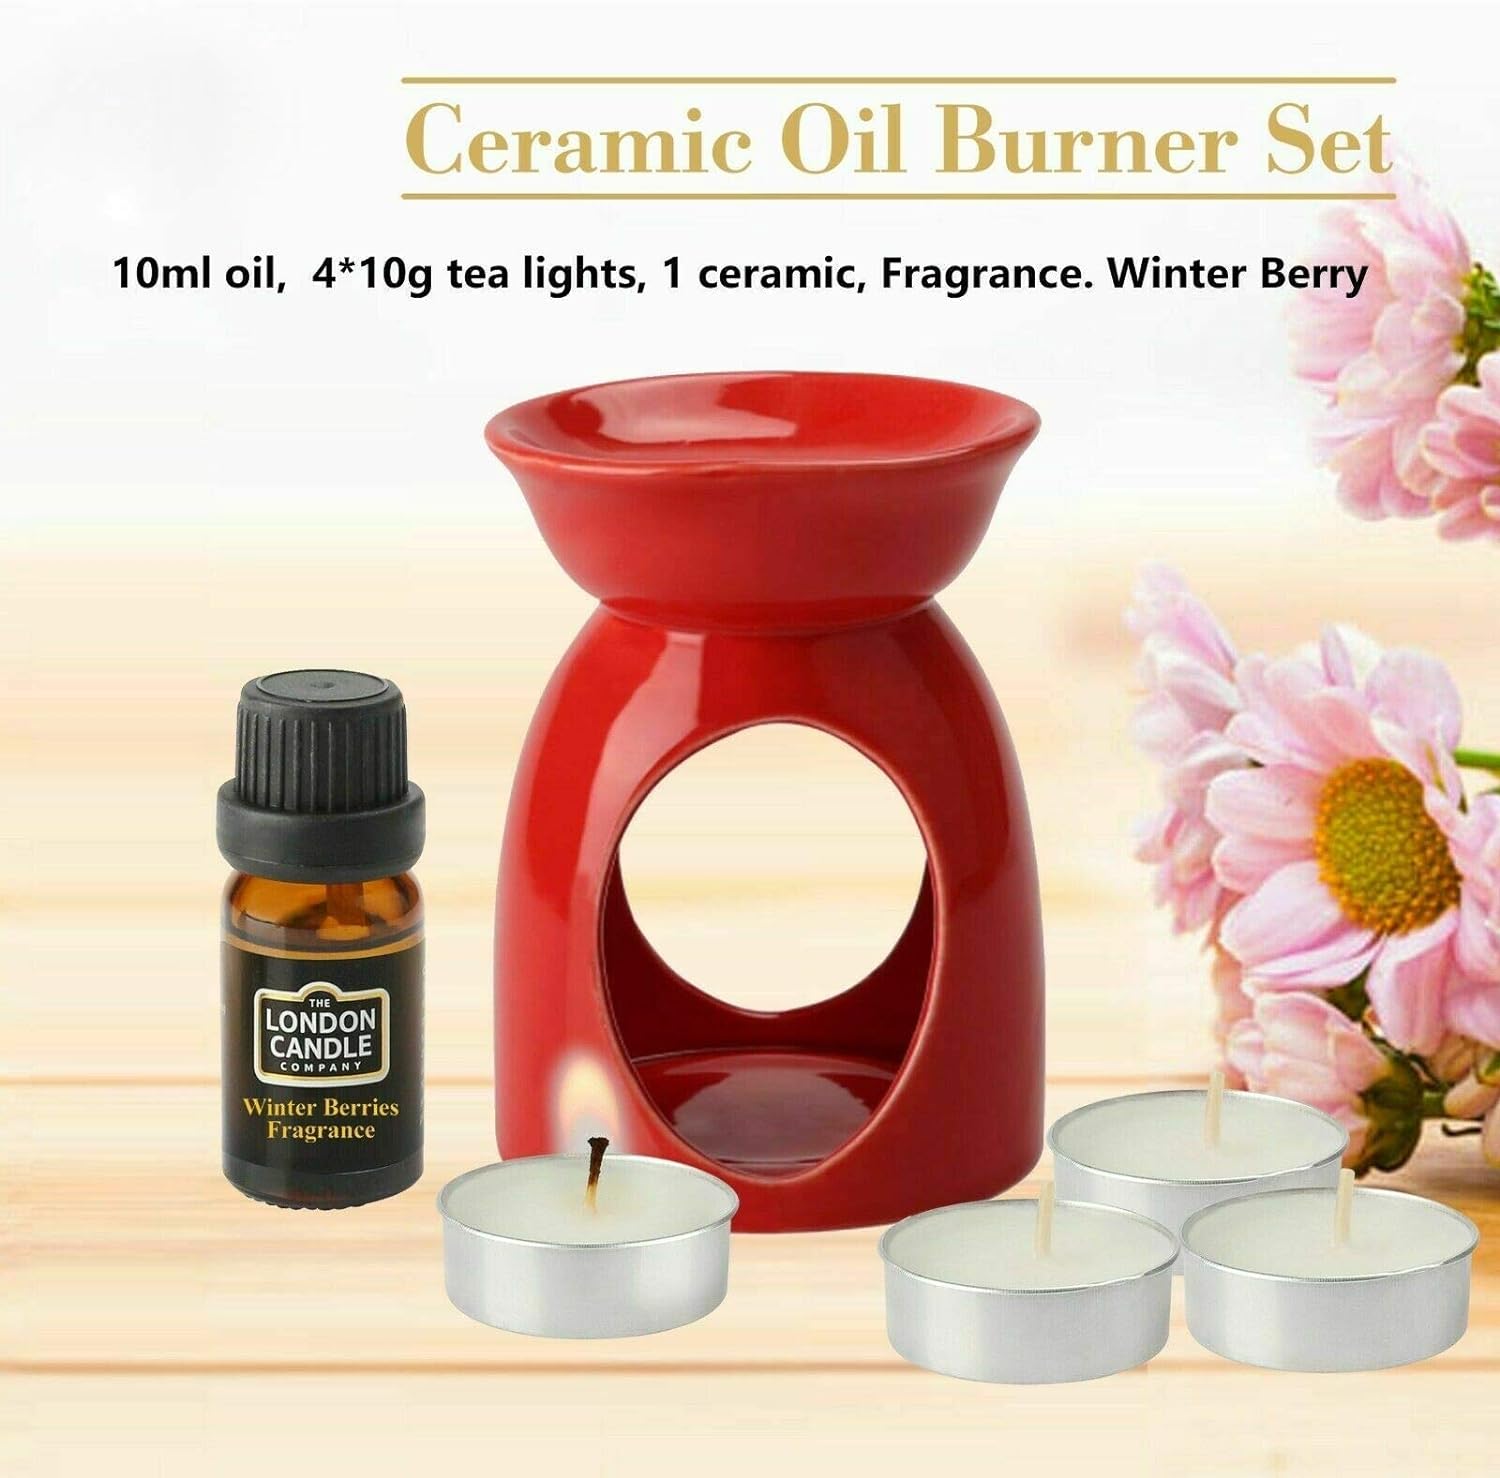 Roll over image to zoom in     ADEPTNA CERAMIC OIL BURNER GIFT SET WITH 4 TEA LIGHT CANDLES AND AROMATIC OIL - PRACTICAL AND STYLISH GIFT FOR XMAS OR ANY OCCASION